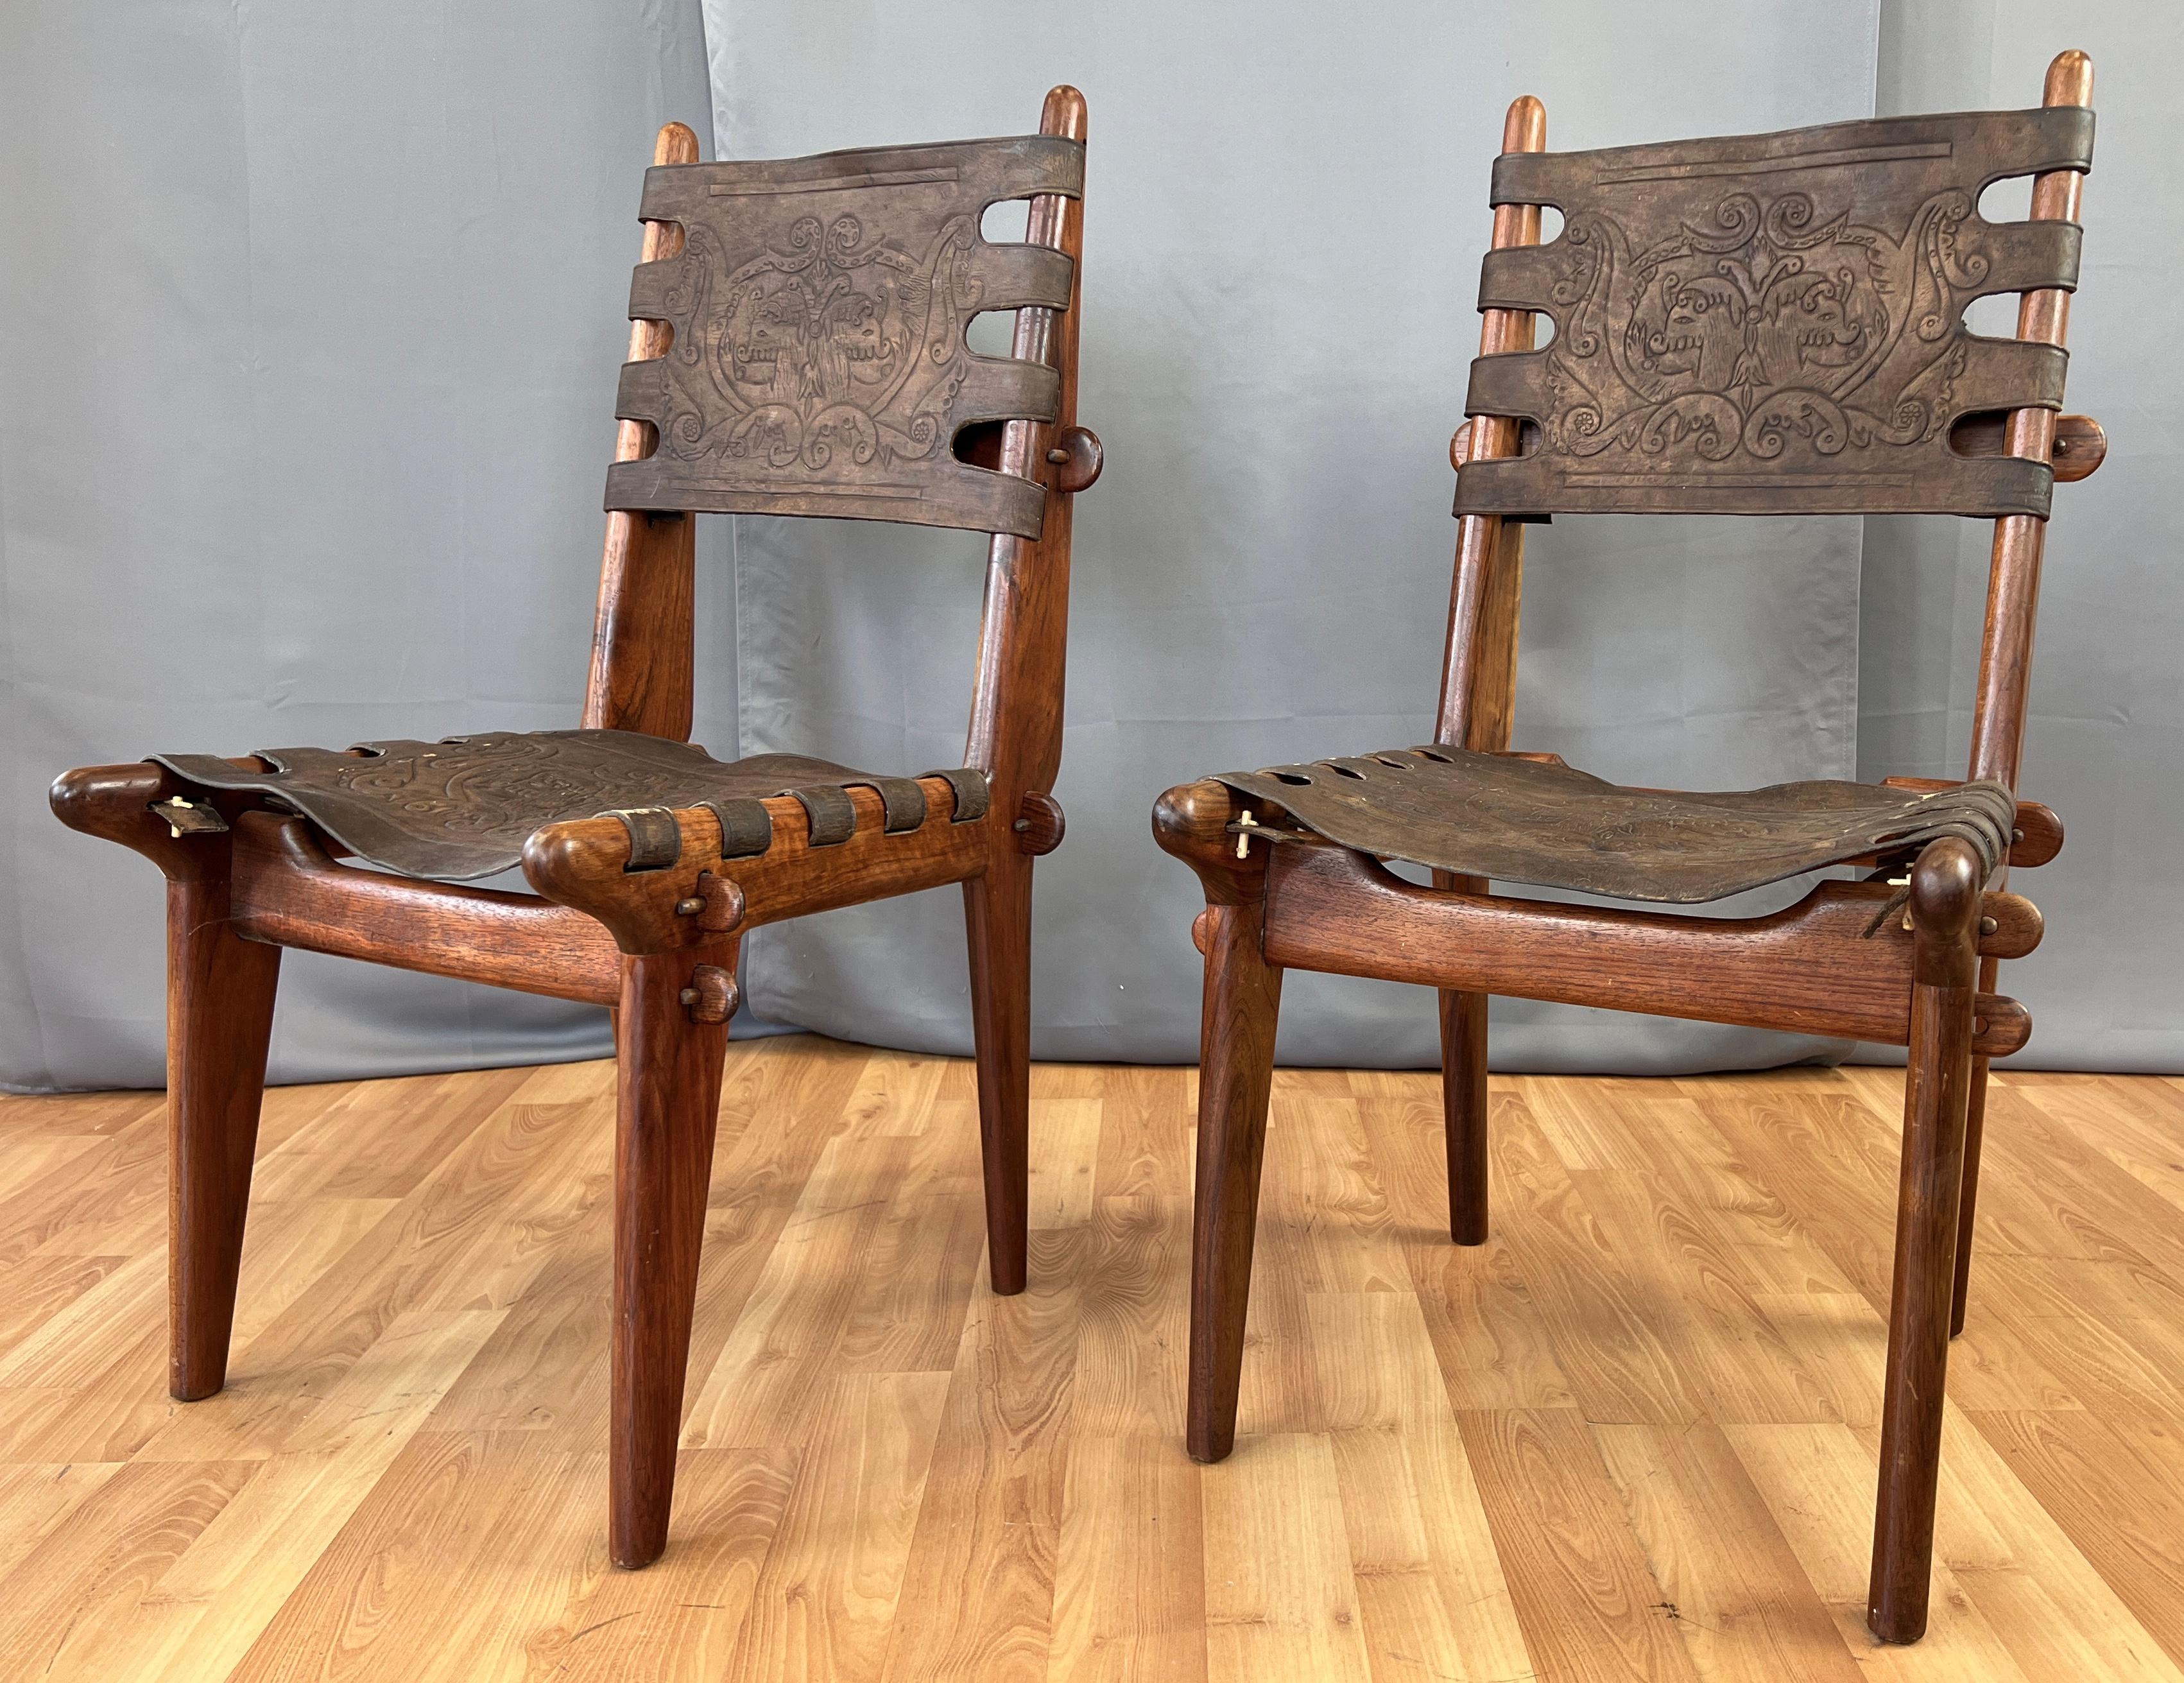 A pair of Angel Pazmino designed teak and leather chairs for Muebles De Estilo, located in Quito Ecuador.
Teak chair frames have wonderful wood grain, and striking form, held together with a system of interlocking joints and wooden pins. Sling